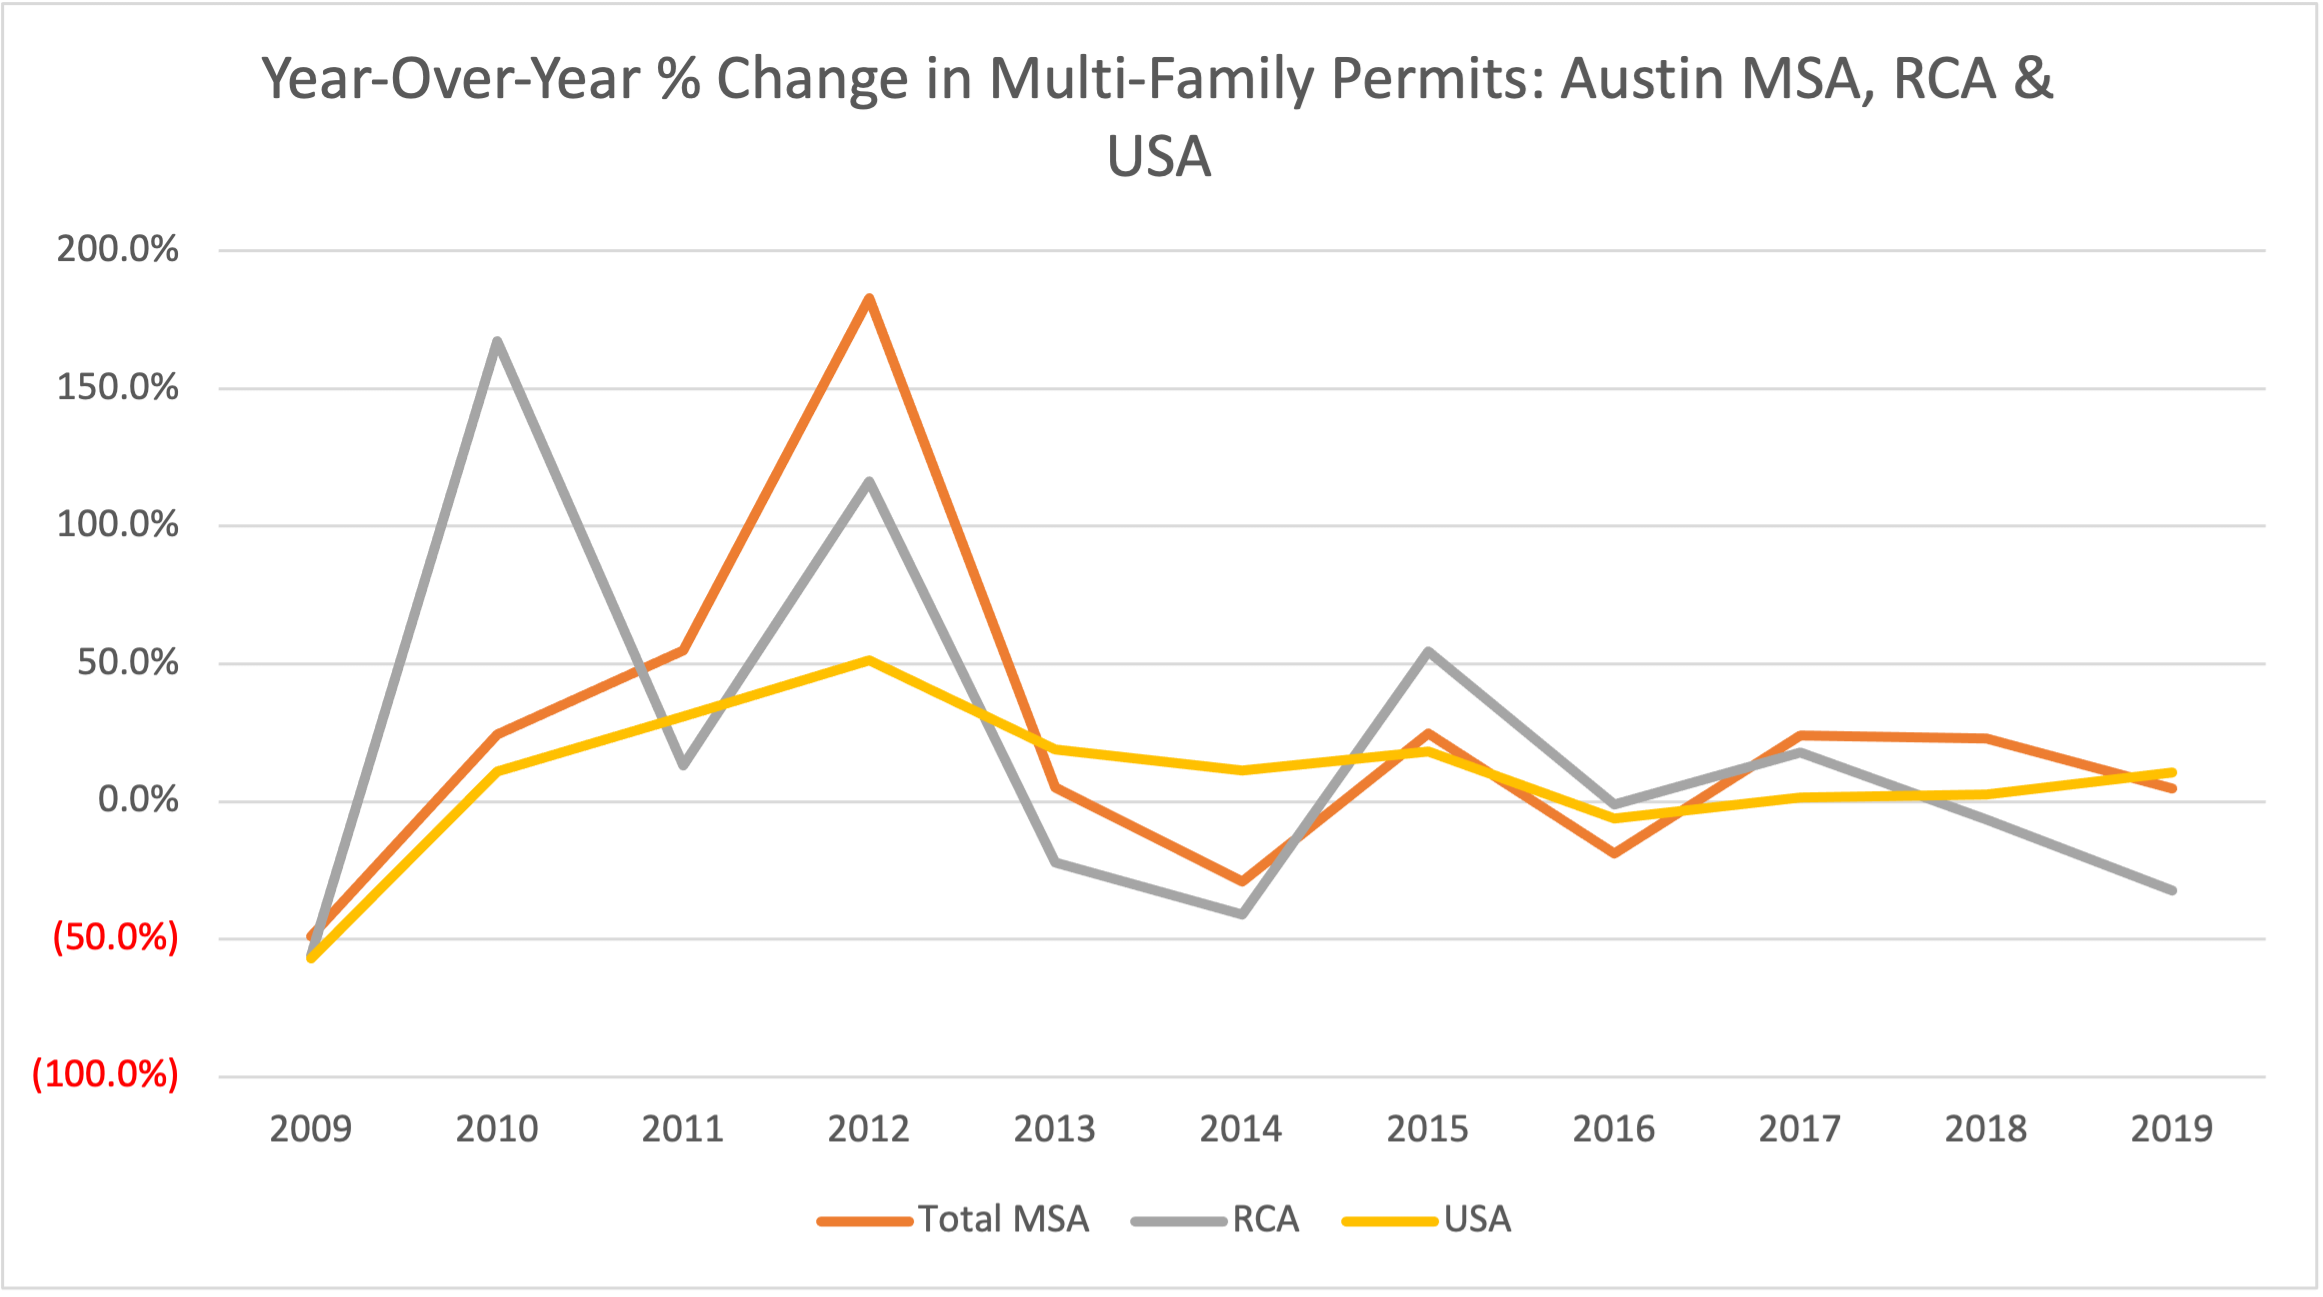 Rural Capital Area Multi Family House Permits Year over Year Percent Change 2009 to 2019